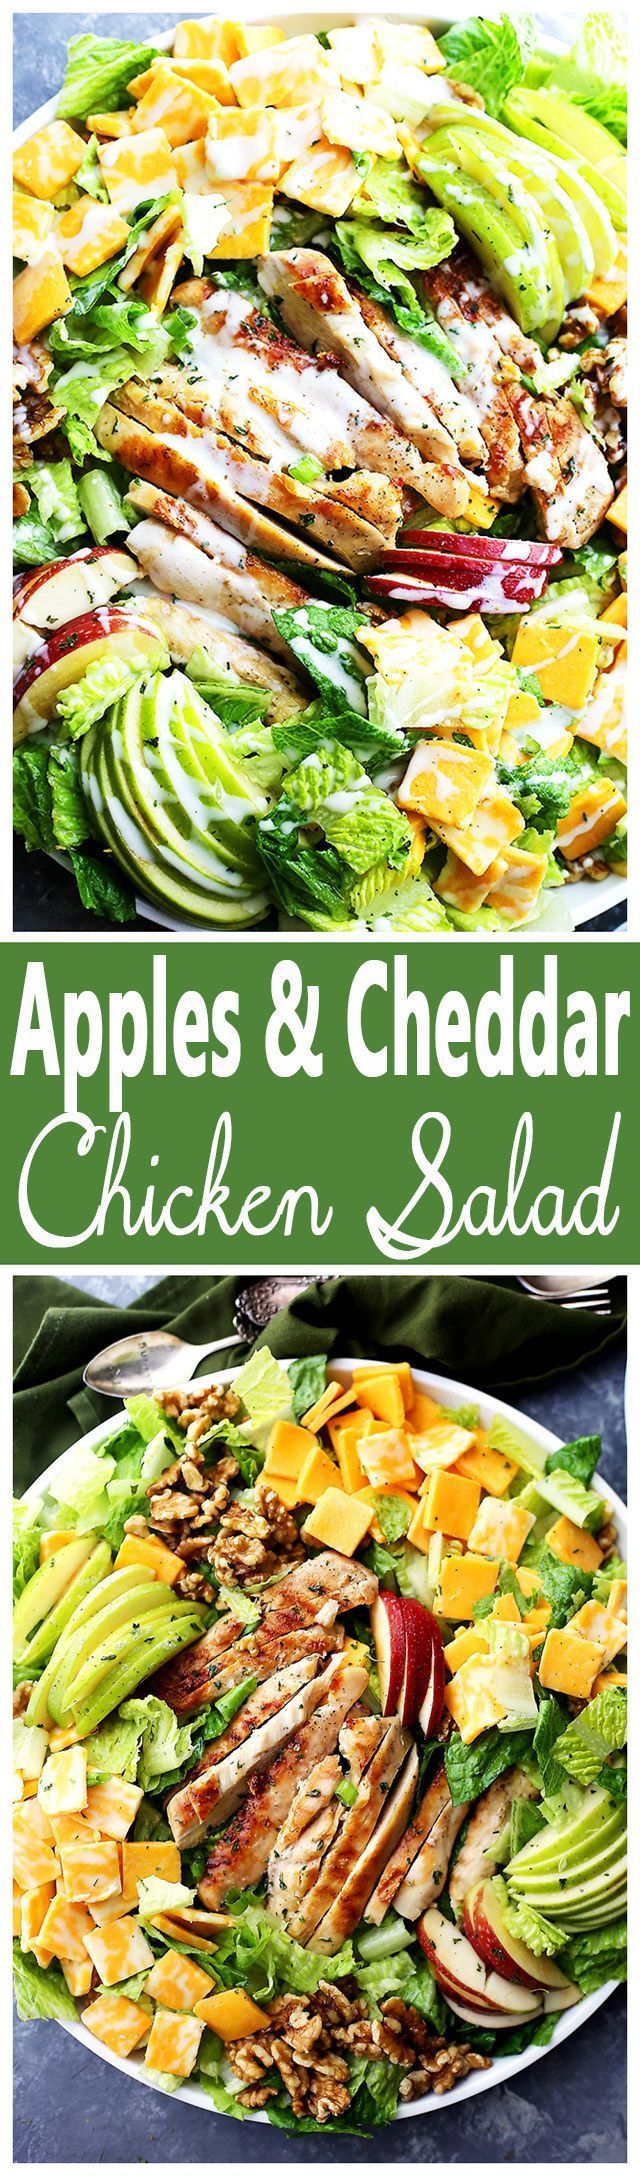 Apples and Cheddar Chicken Salad – Apples, cheddar cheese and walnuts pack a delicious crunchy bite in this Chicken Salad with